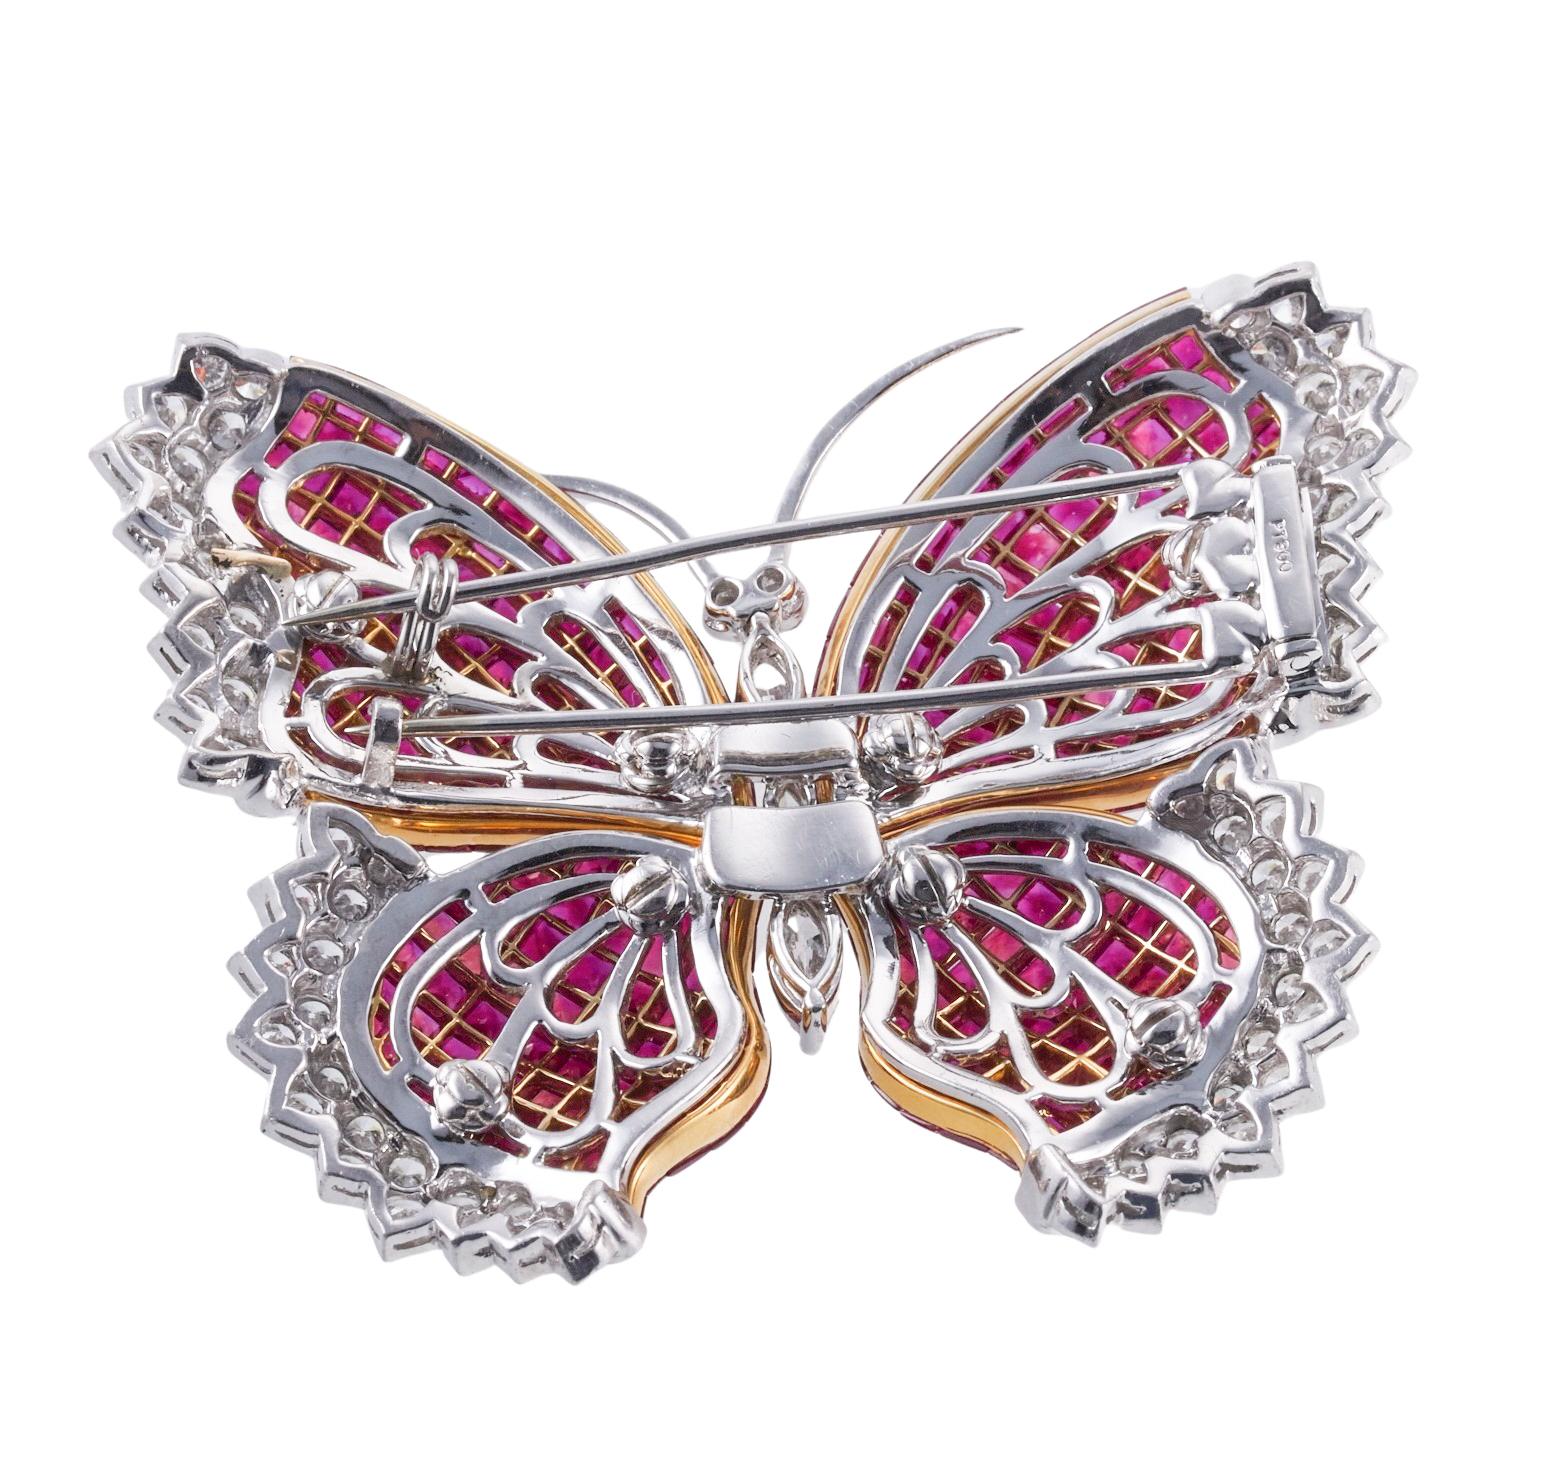 Beautiful and intricate butterfly brooch, set in platinum and 18k gold, featuring invisible set vibrant rubies and approx. 4.40ctw G-H/VS diamonds. Brooch measures 2